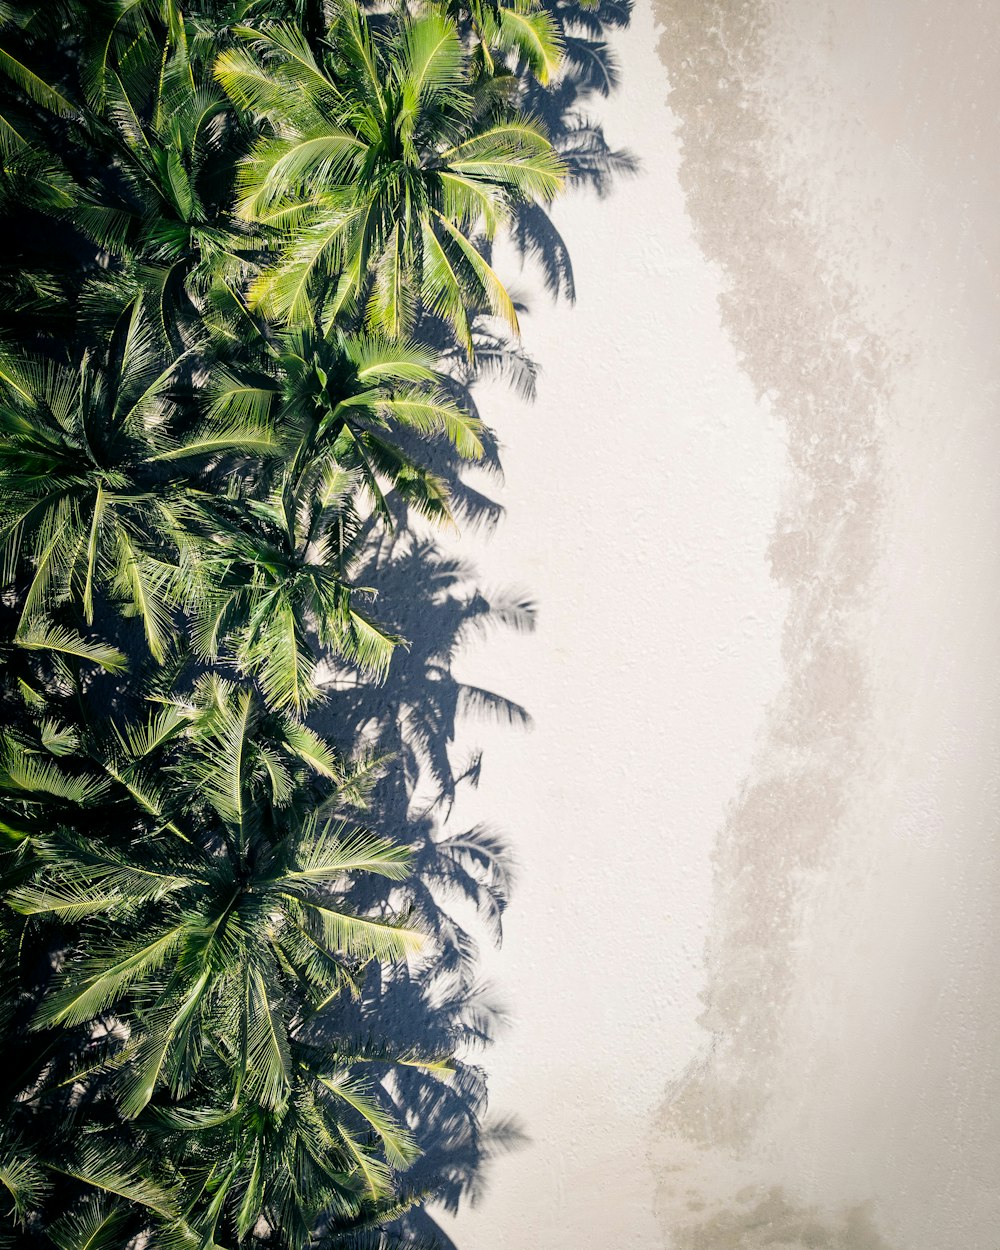 coconut palm trees